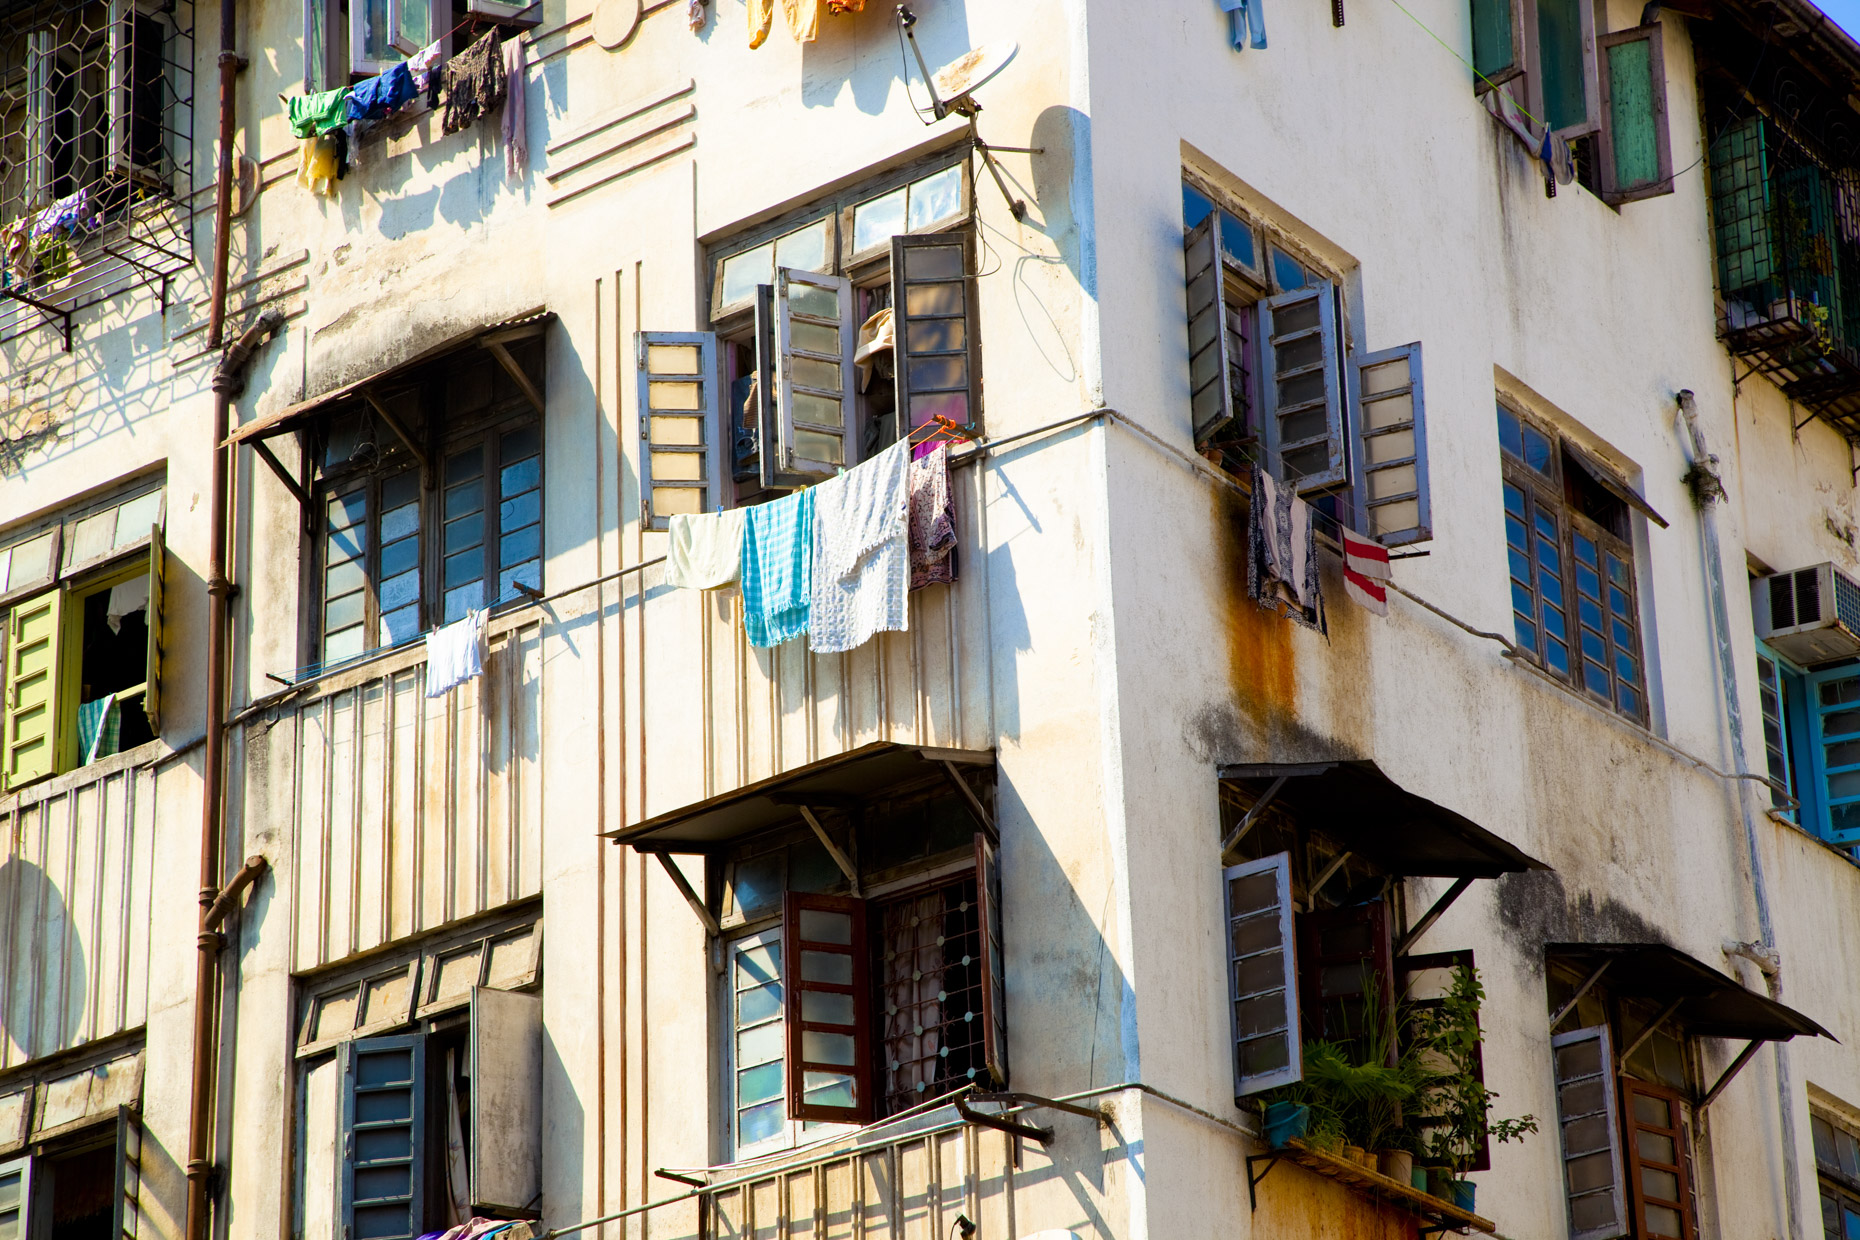 Laundry hanging out of windows of apartment building in India